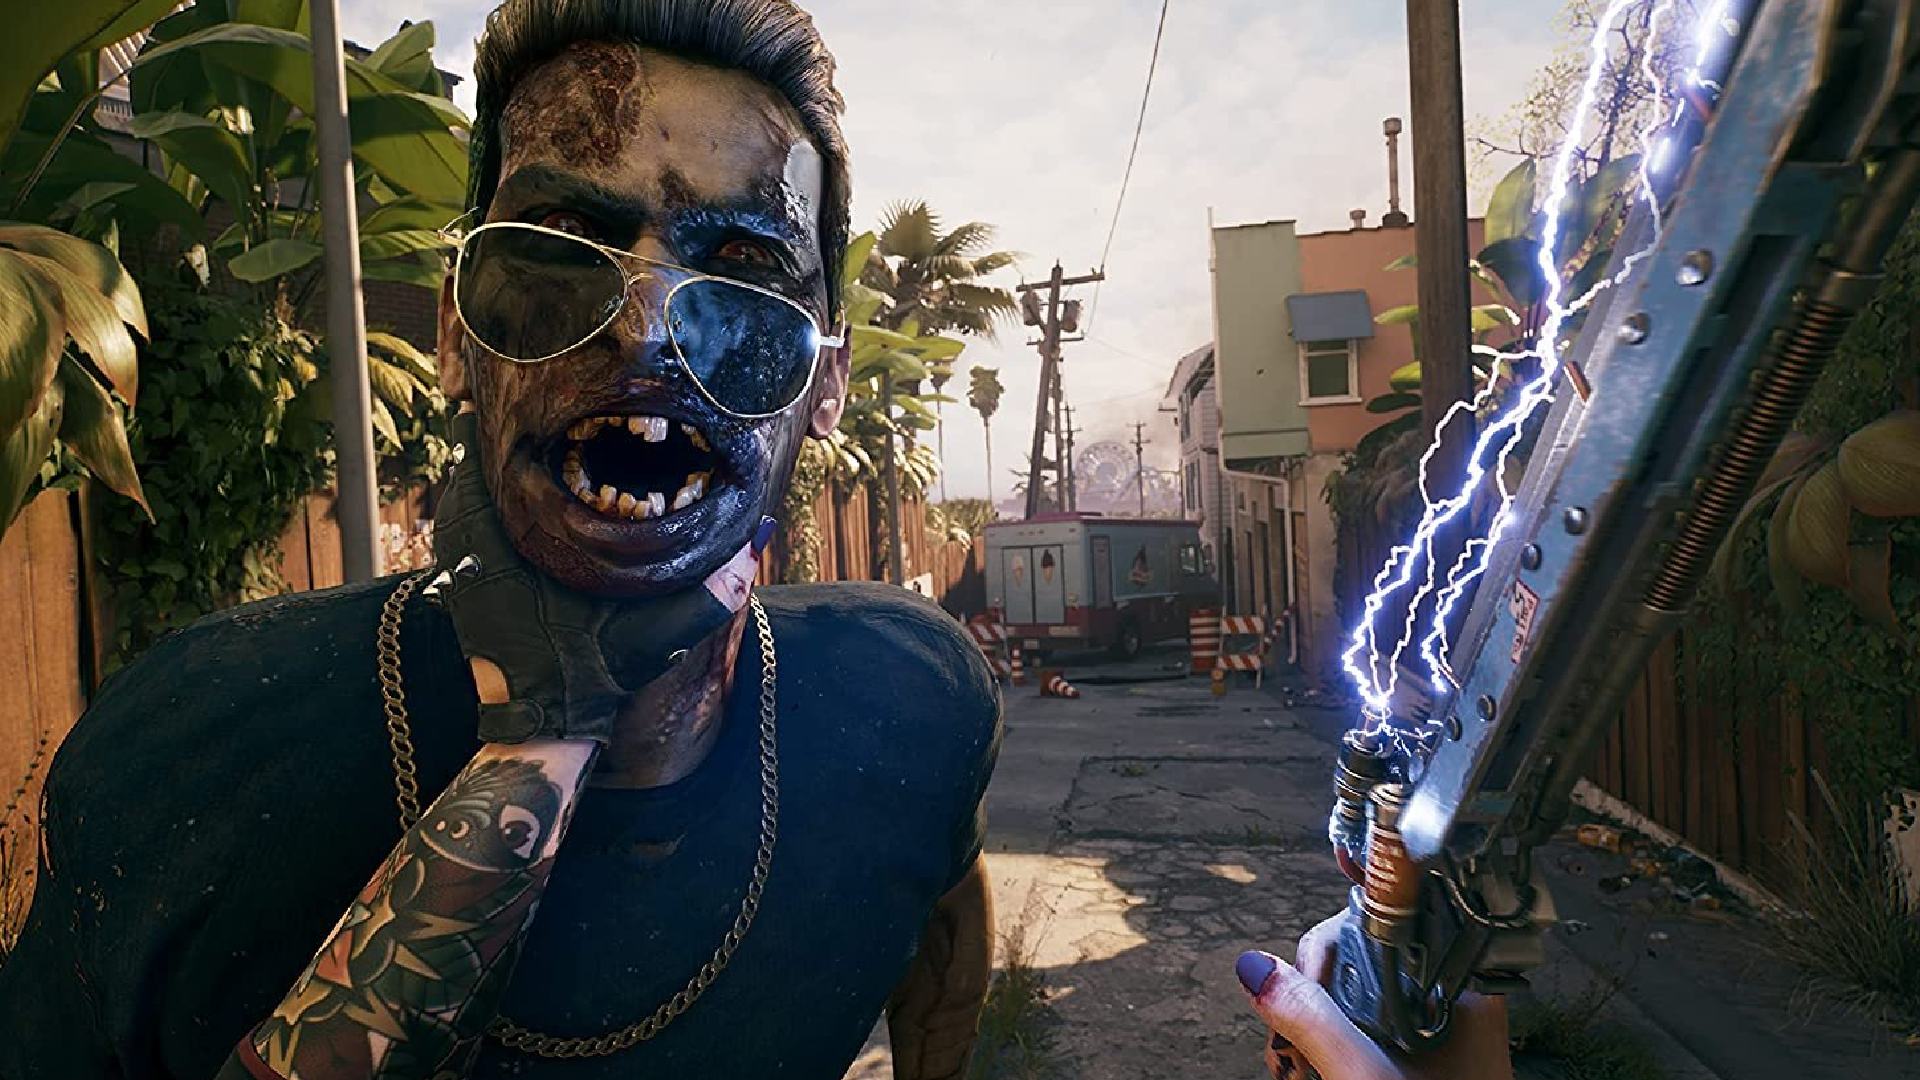 Dead Island 2 weapons: A person can be sseen grabbing a zombie